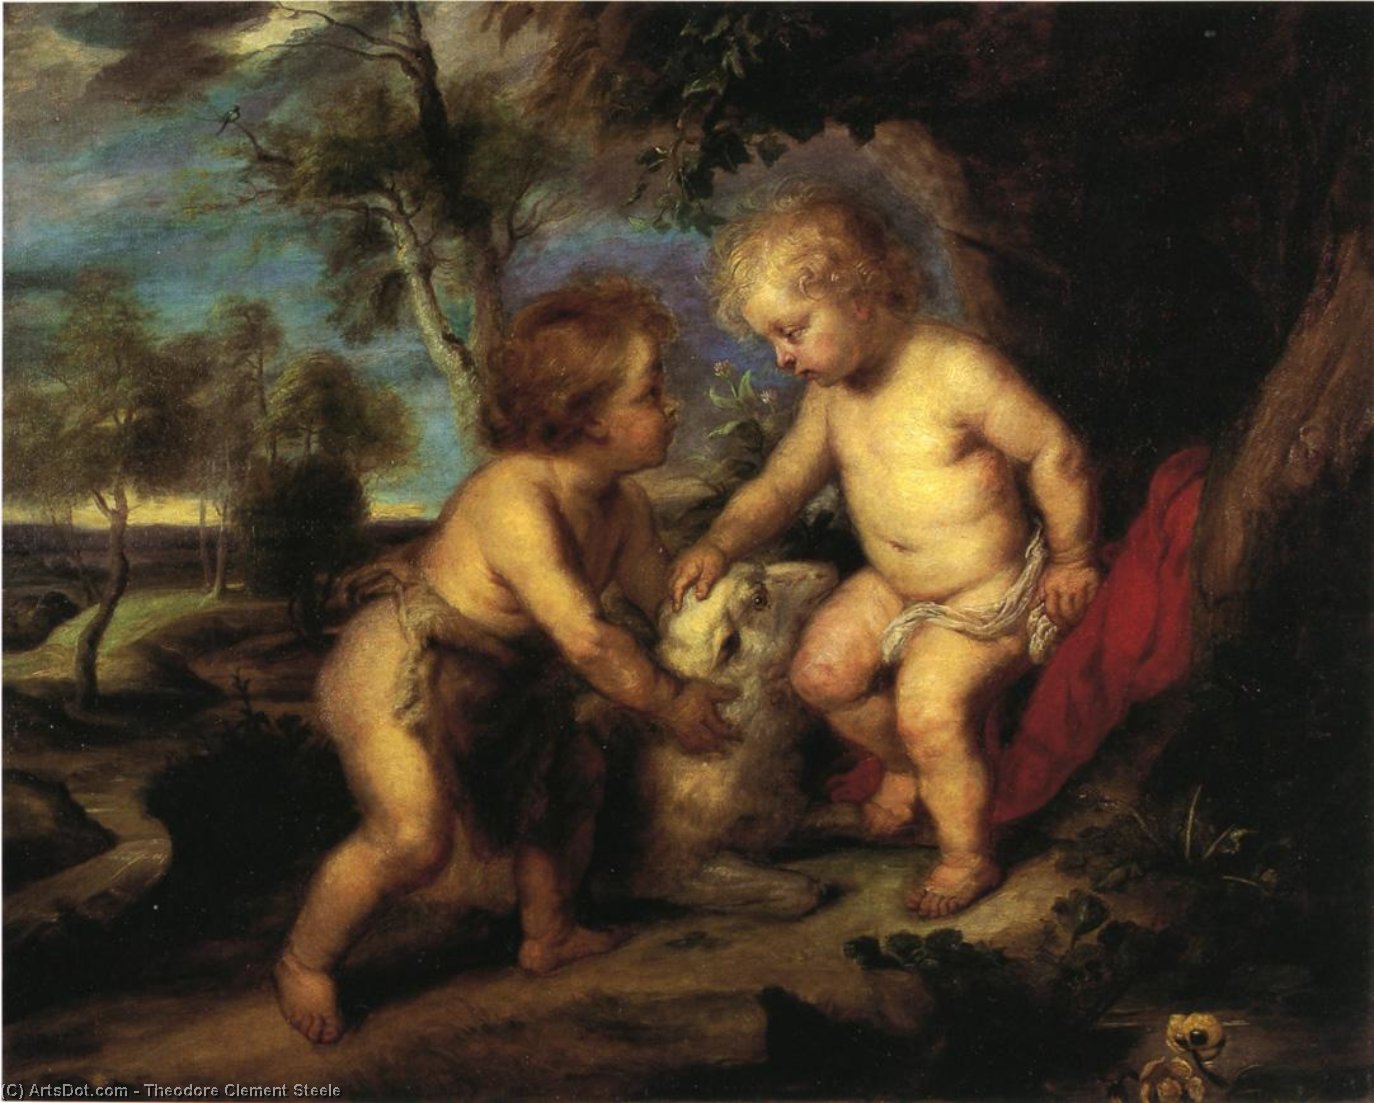 Order Art Reproductions The Christ Child and the Infant St. John after Rubens, 1883 by Theodore Clement Steele (1847-1926, United States) | ArtsDot.com